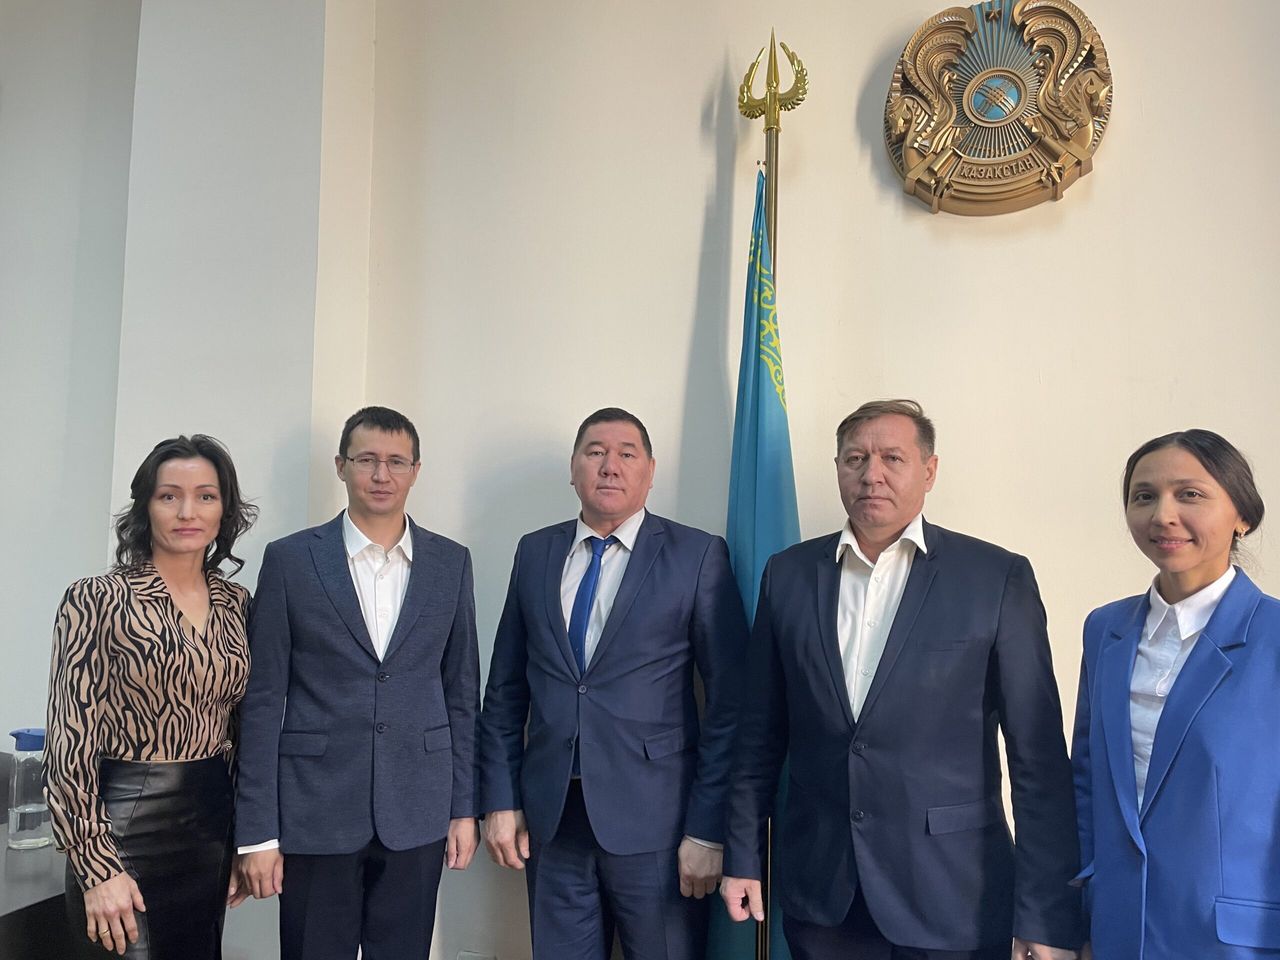 Institute of History and Ethnology named after Ch.Ch. Valikhanov concluded a memorandum of cooperation with the Institute of History, Language and Literature of the Ufa Federal Research Center of the Russian Academy of Sciences  